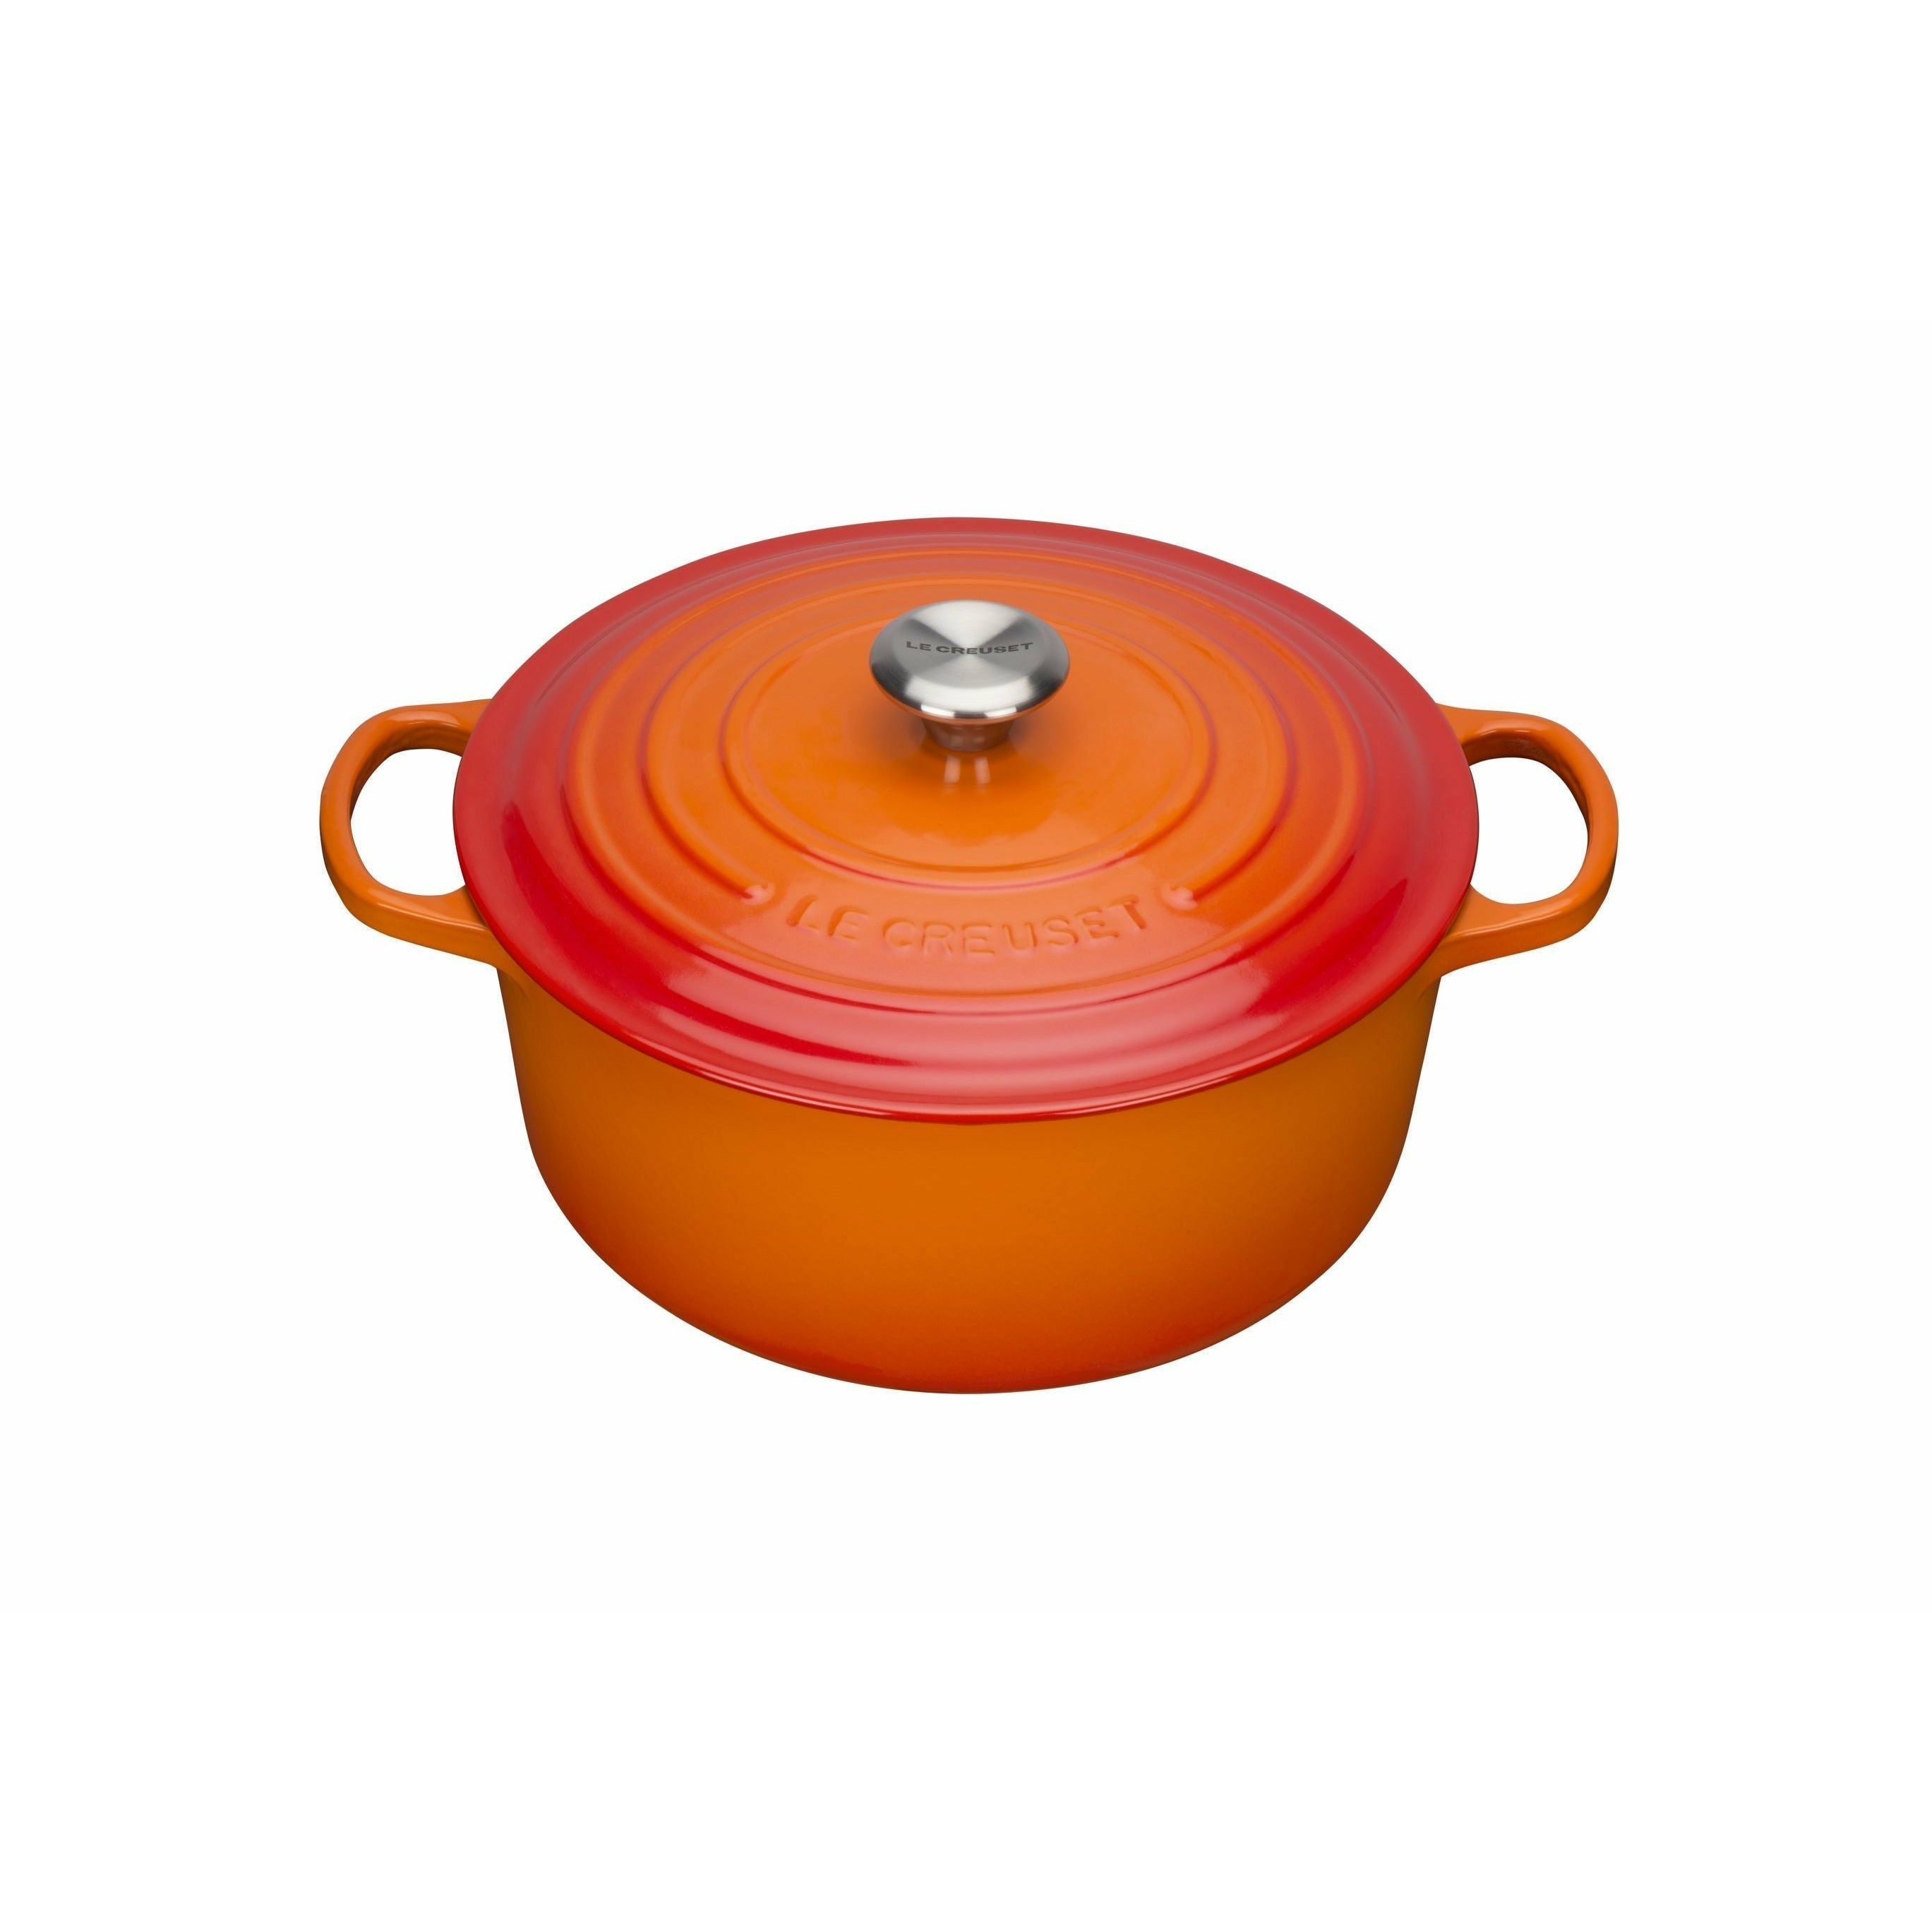 Le Creuset Signature Round Roaster 18 Cm, Oven Red